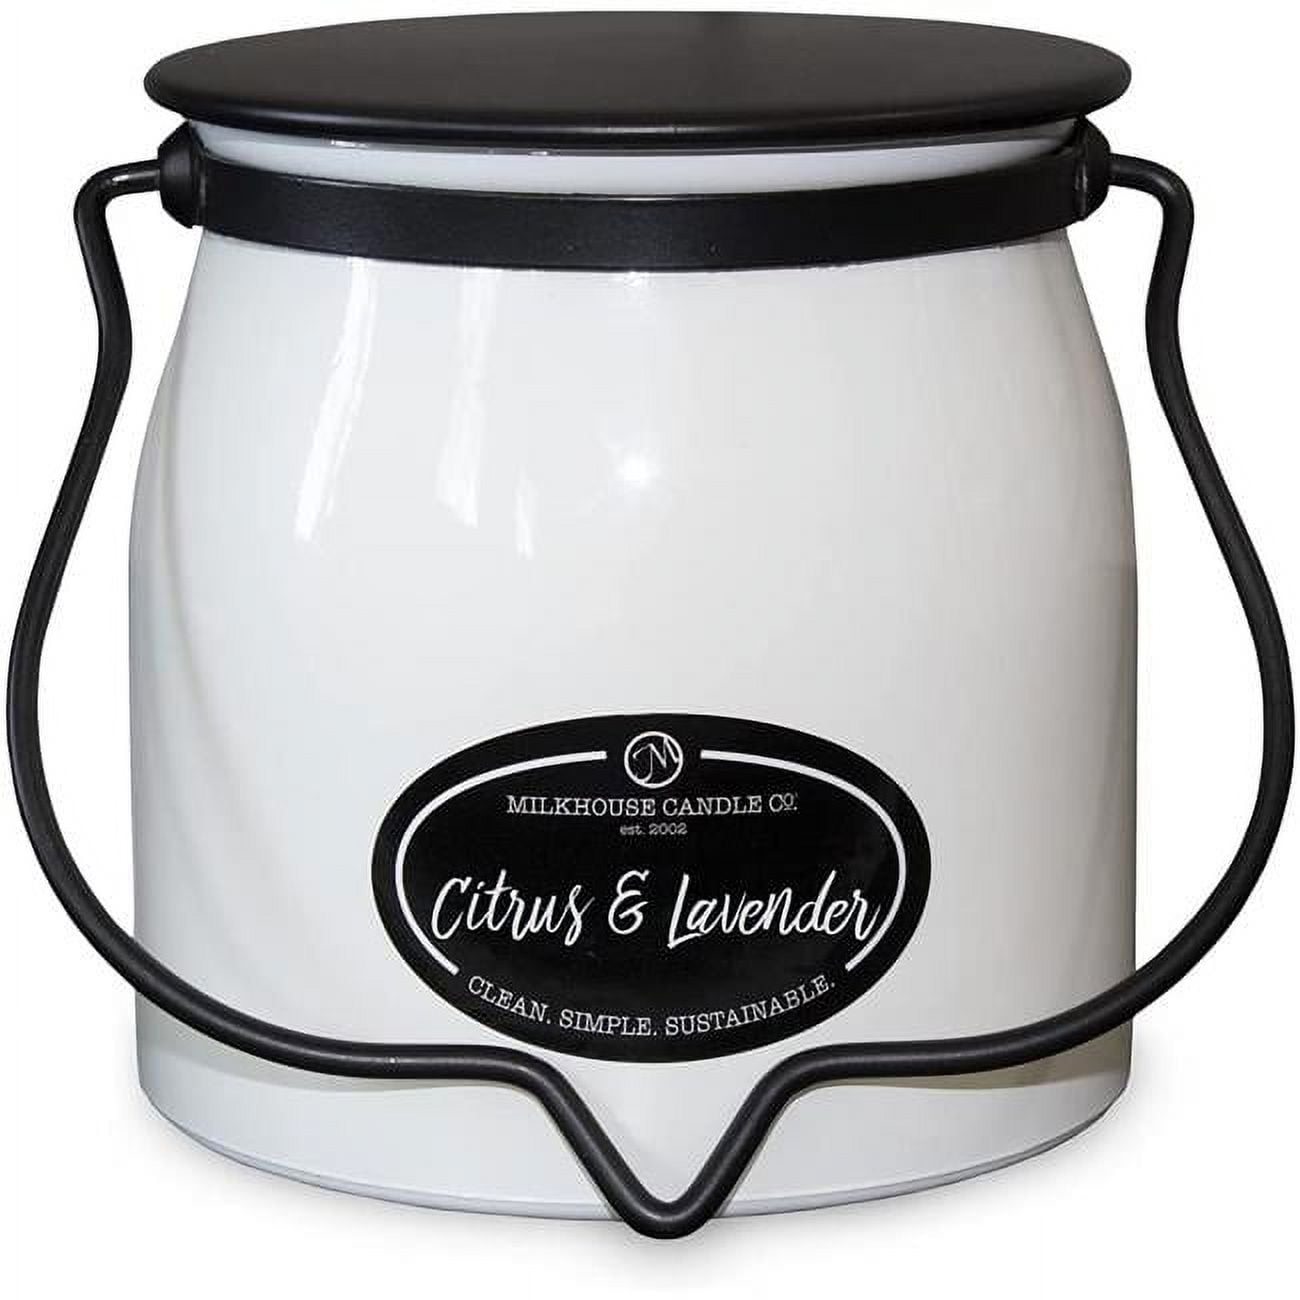 Milkhouse Candle Creamery Lilac & Wildflowers Fragrance Melt by Milkhouse  Candle Creamery